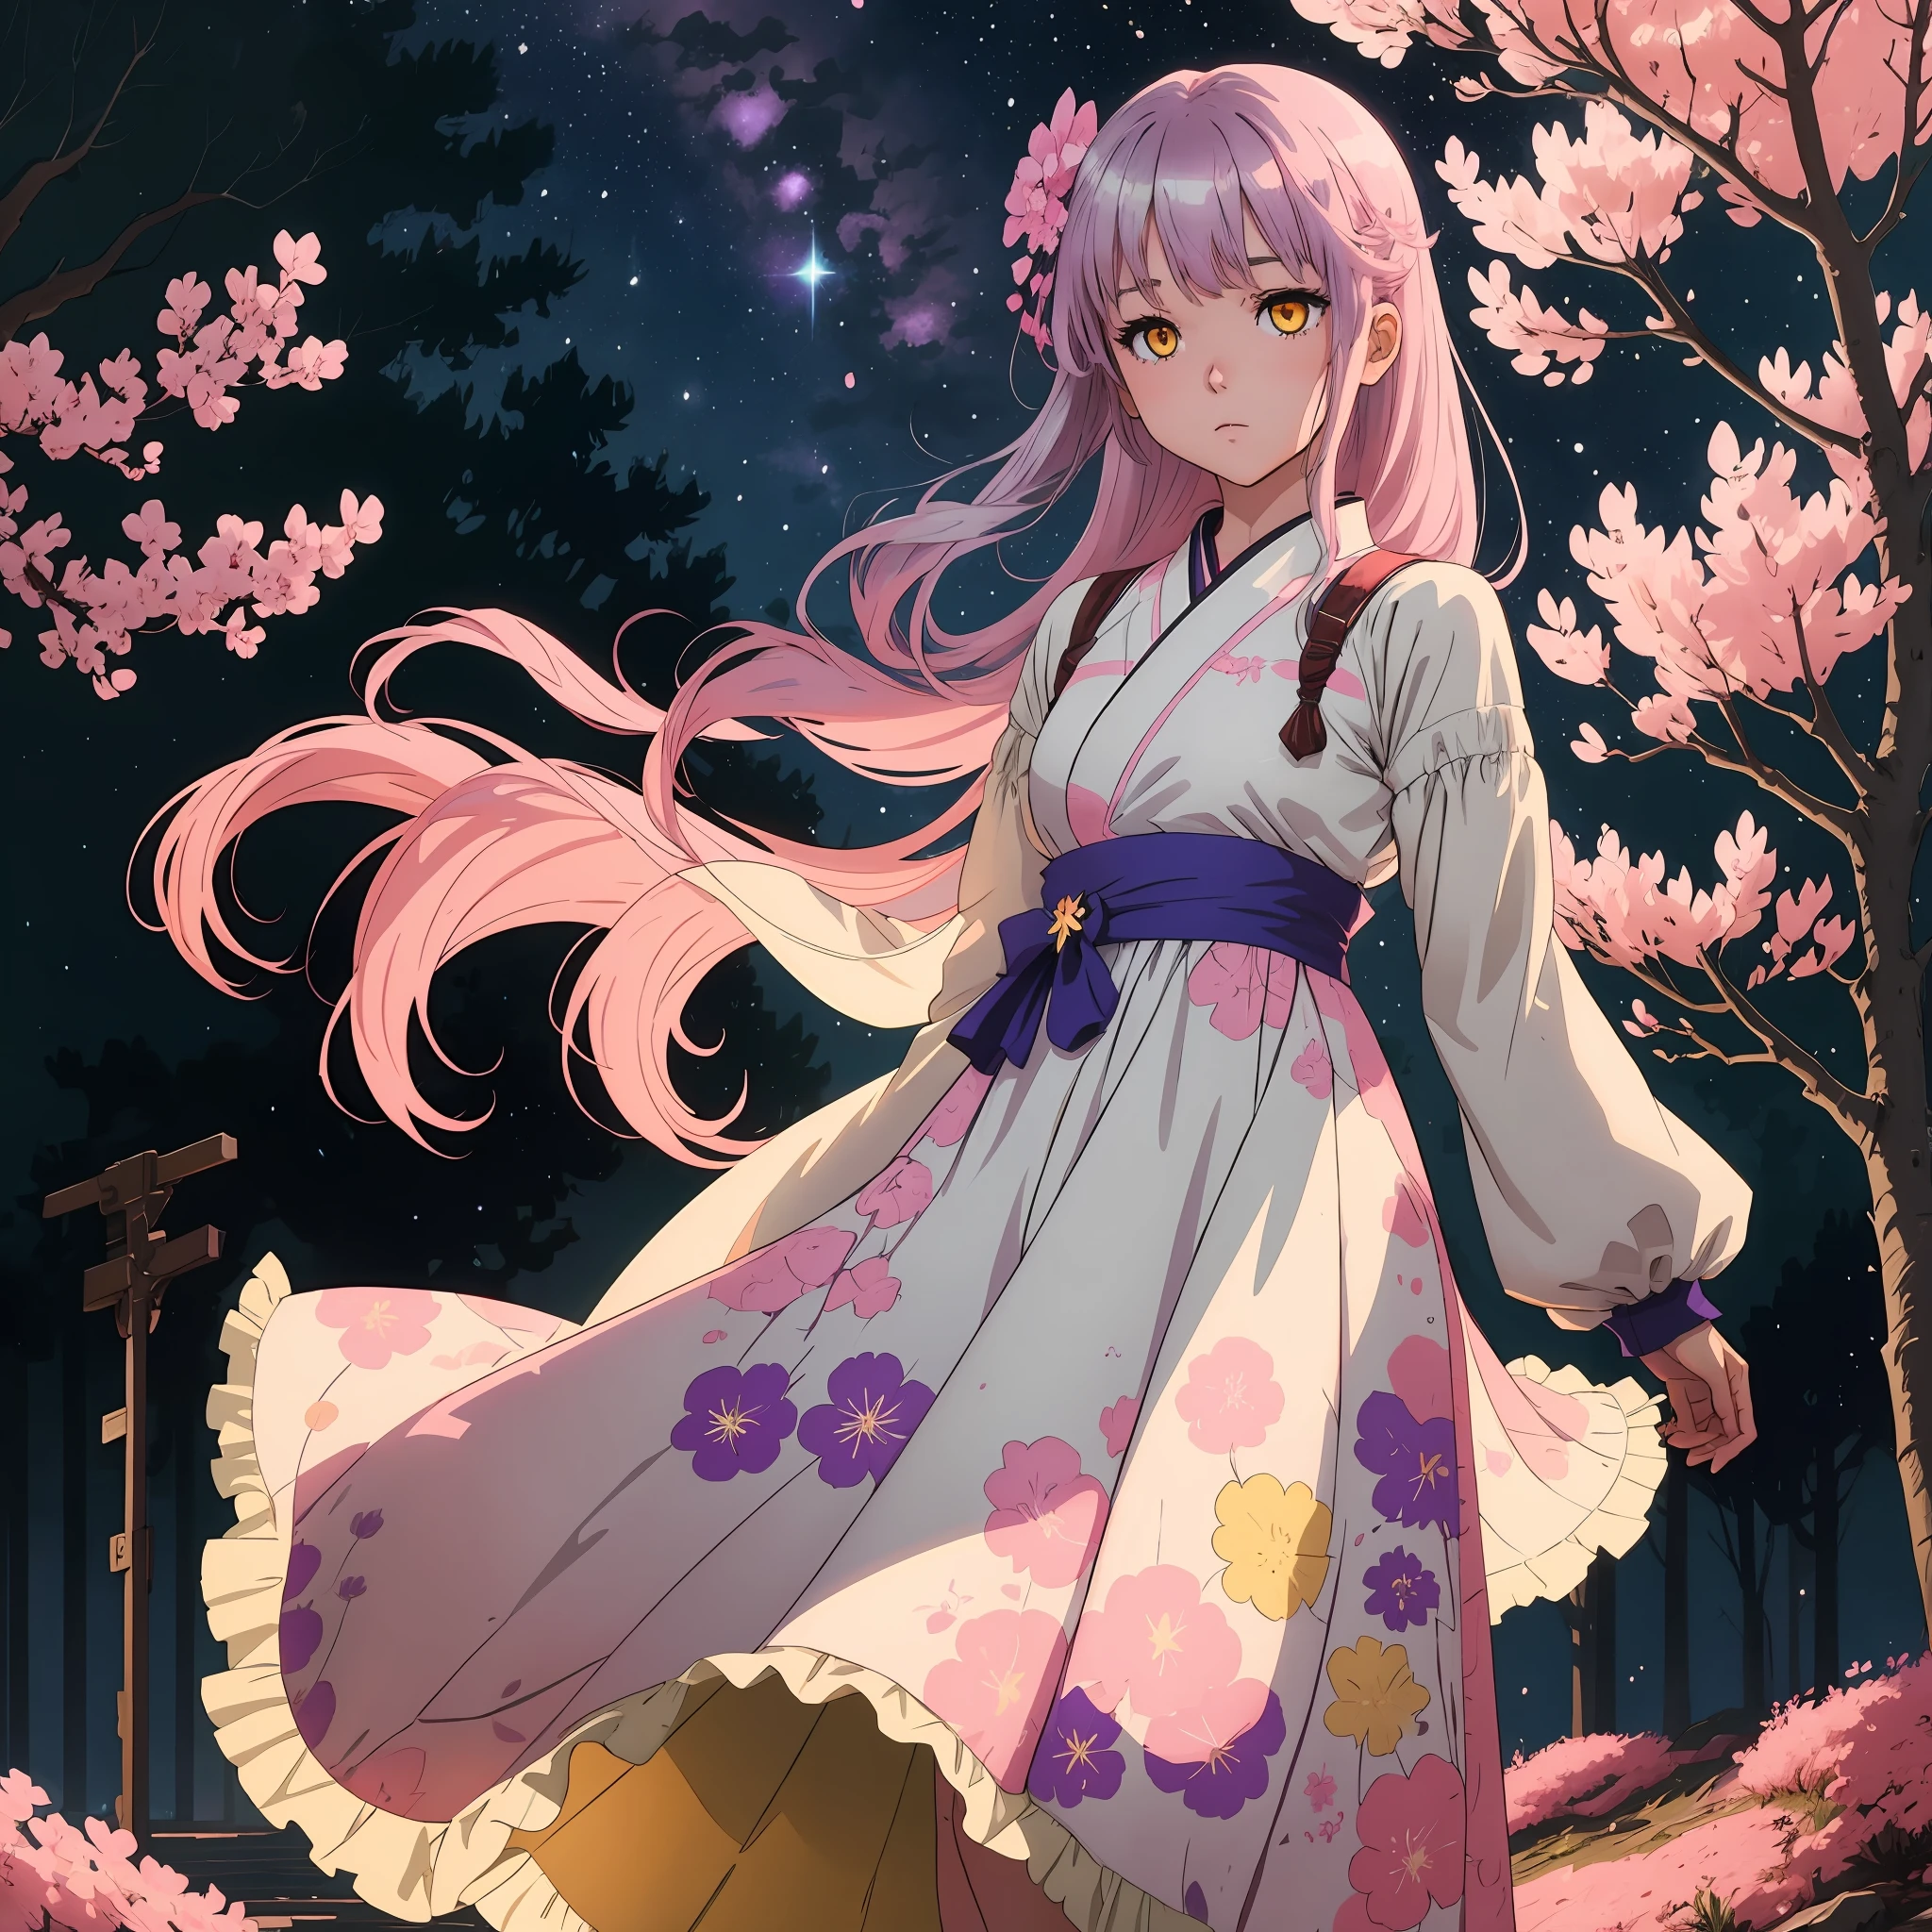 A silver haired 2d anime girl with bright yellow eyes and pink Sakura in her hair wearing lavender fluffy tule dress standing under starry night sky by herself alone surrounded by Sakura trees